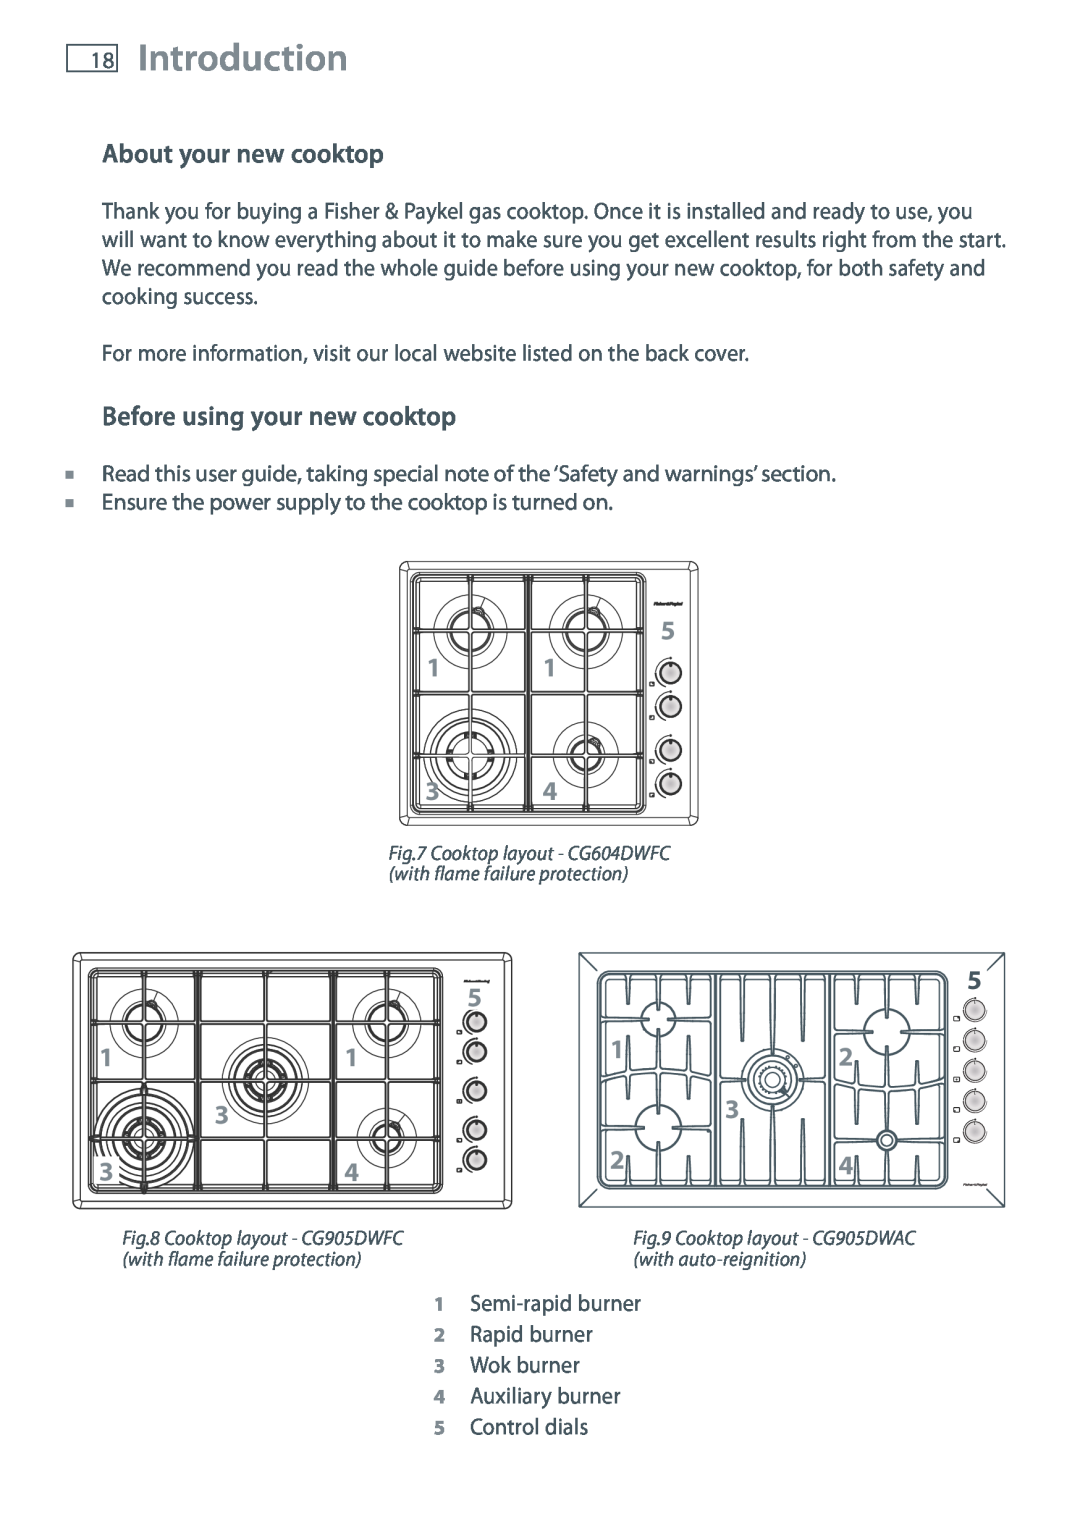 Fisher & Paykel CG905 installation instructions Introduction, About your new cooktop, Before using your new cooktop 